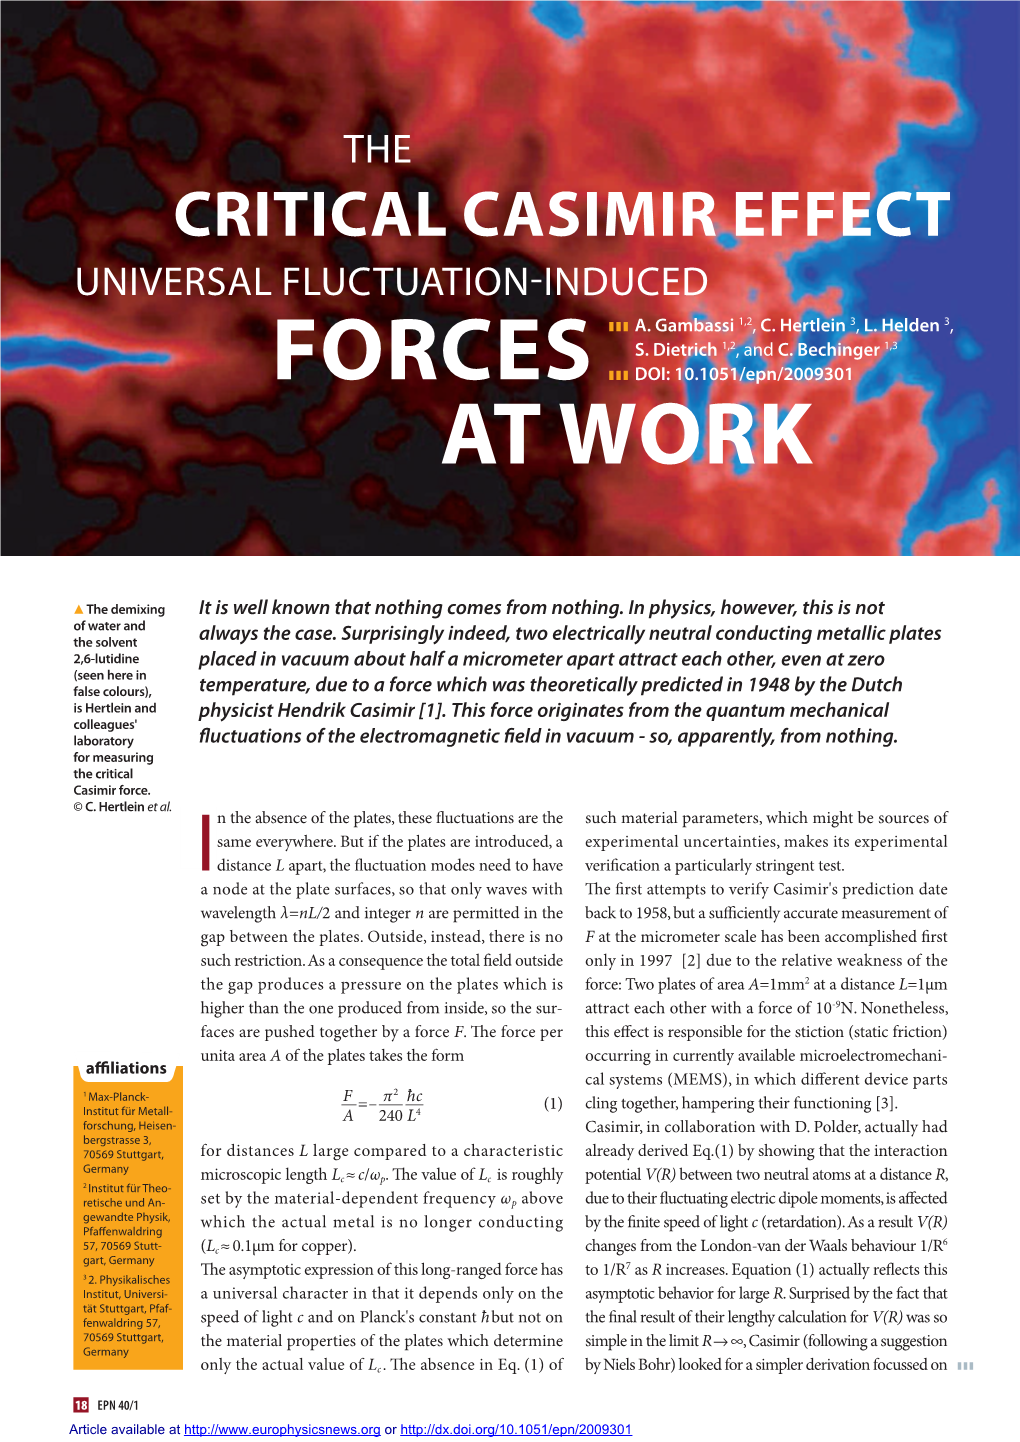 The Critical Casimir Effect Universal Fluctuation-Induced Forces at Work